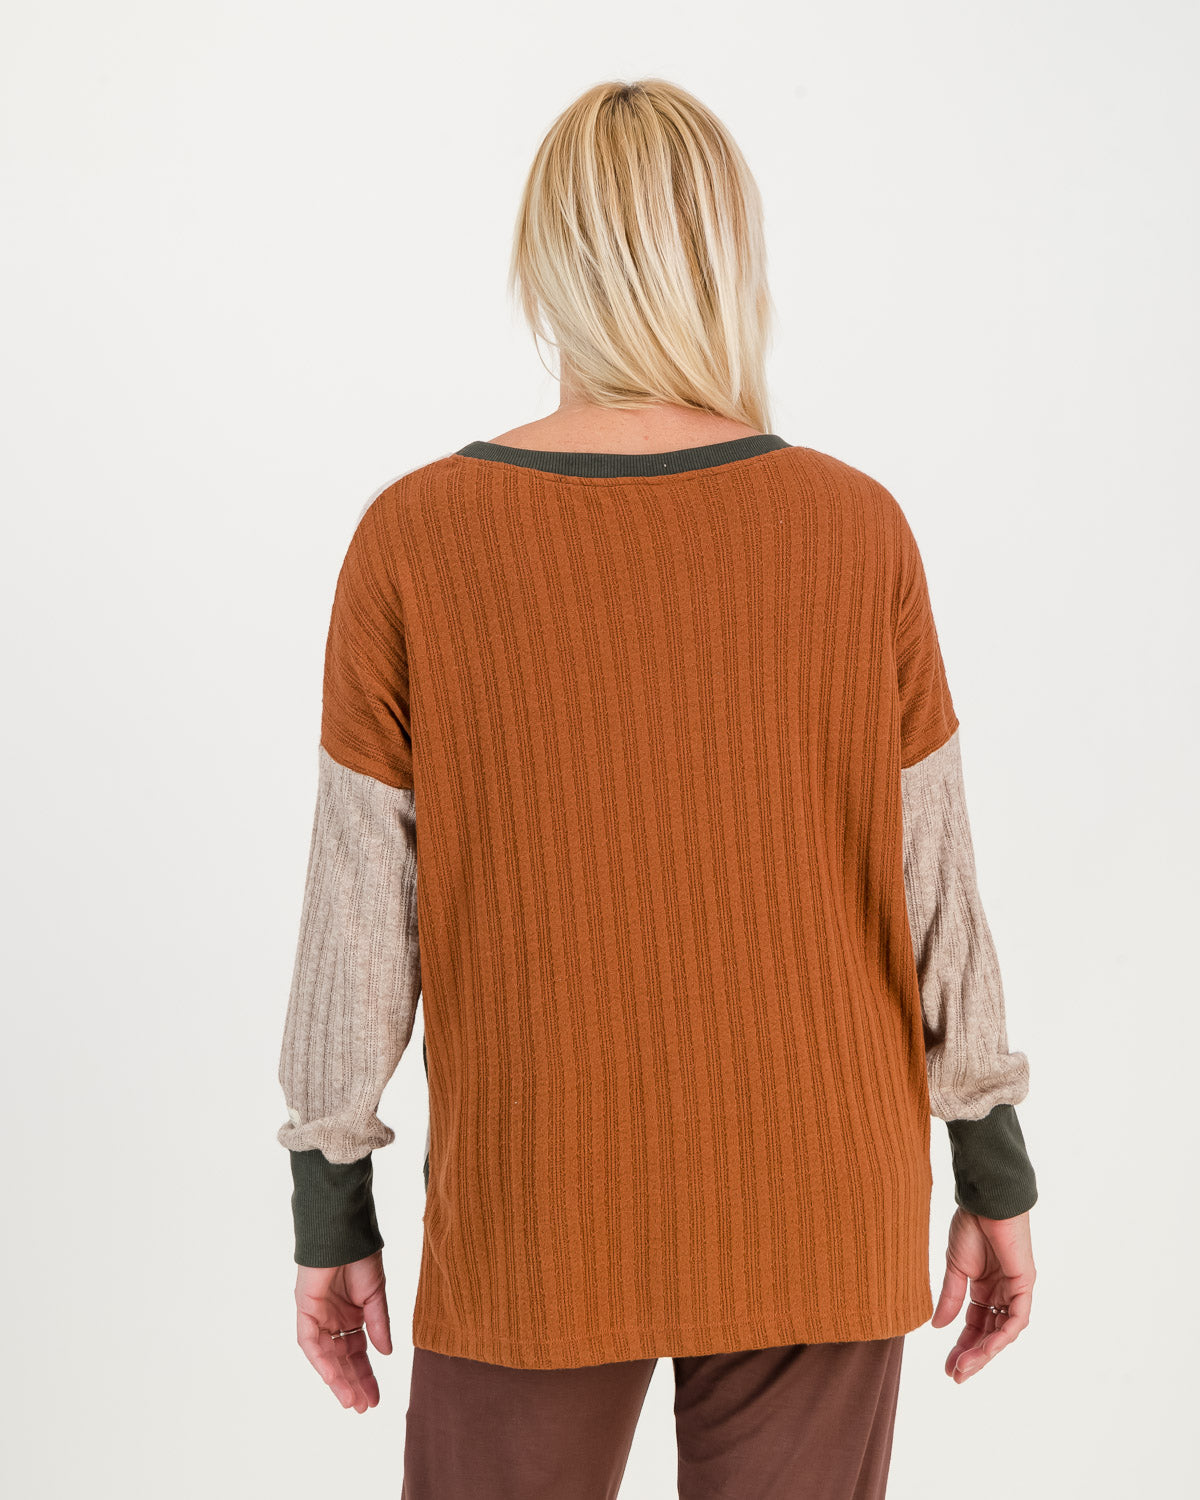 Care free jersey, rust color back view with stone and olive sleeves